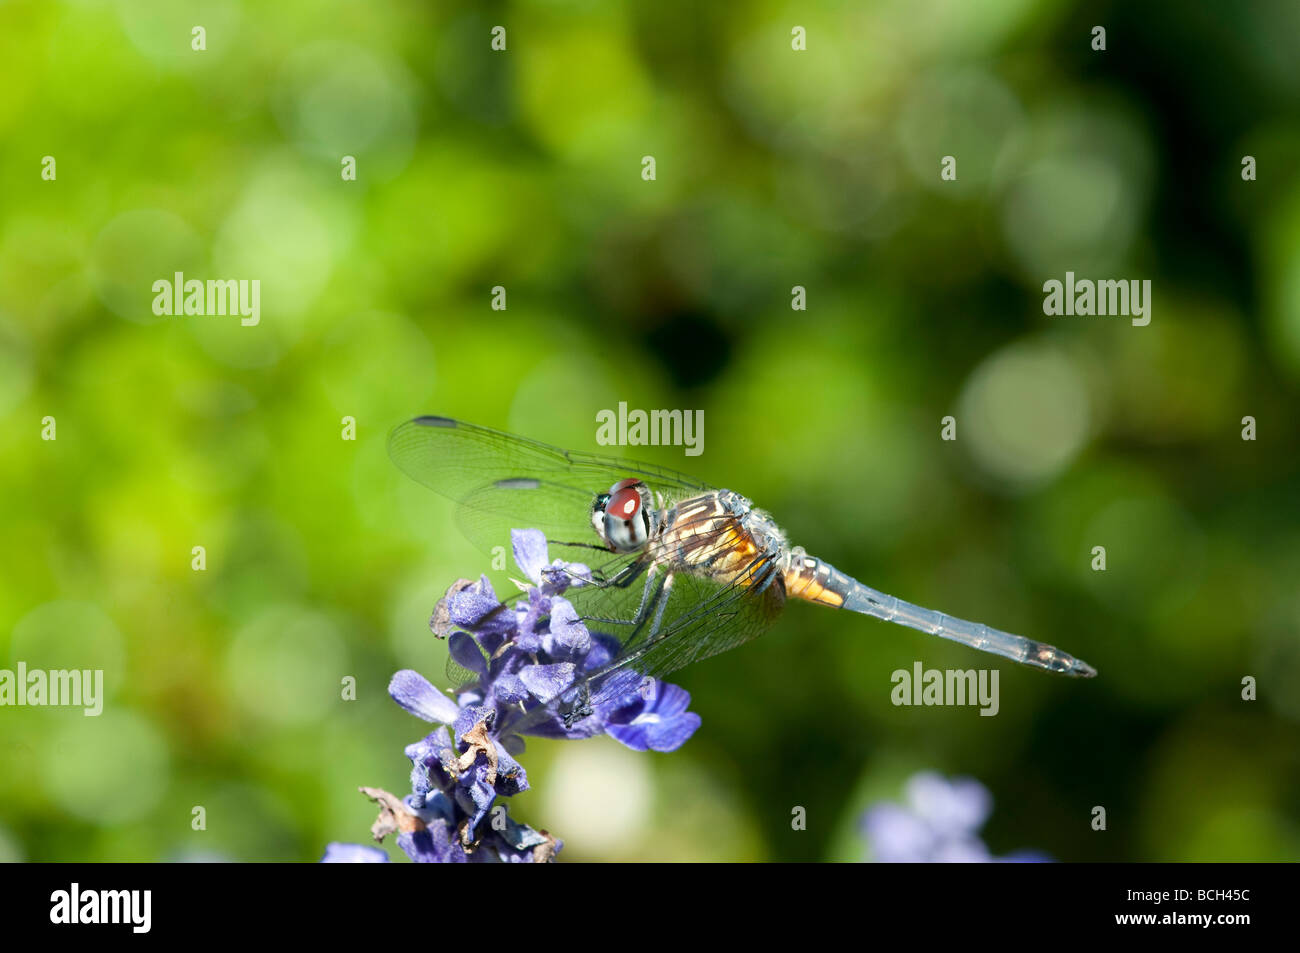 Dragonfly on a Flower Stock Photo